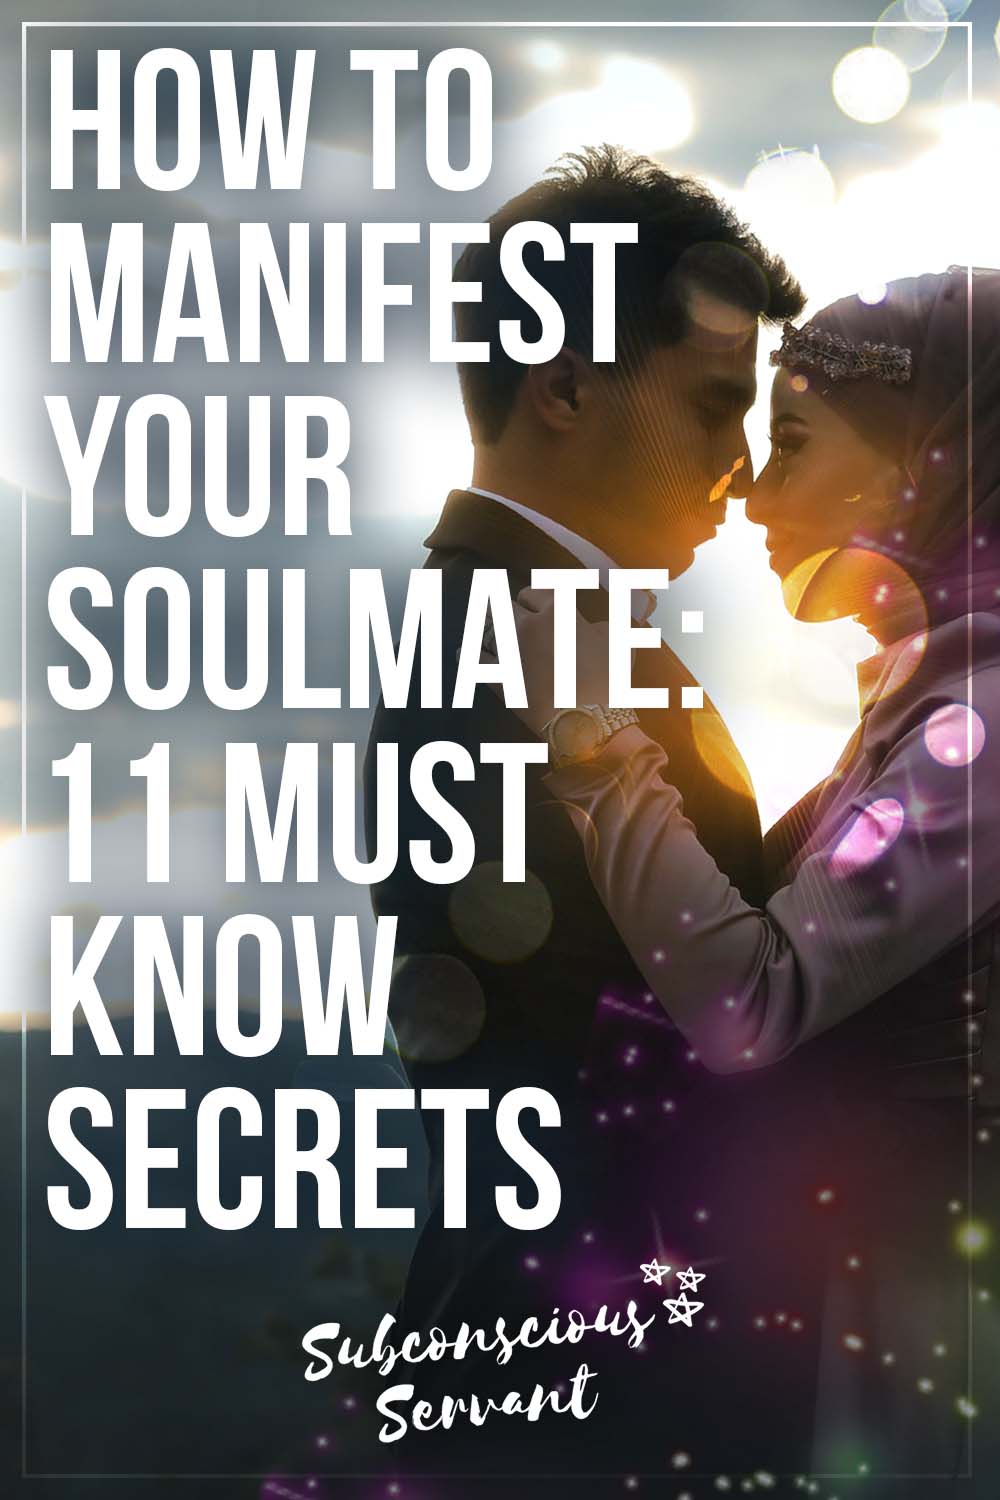 How To Manifest Your Soulmate: 11 Must-Know Secrets